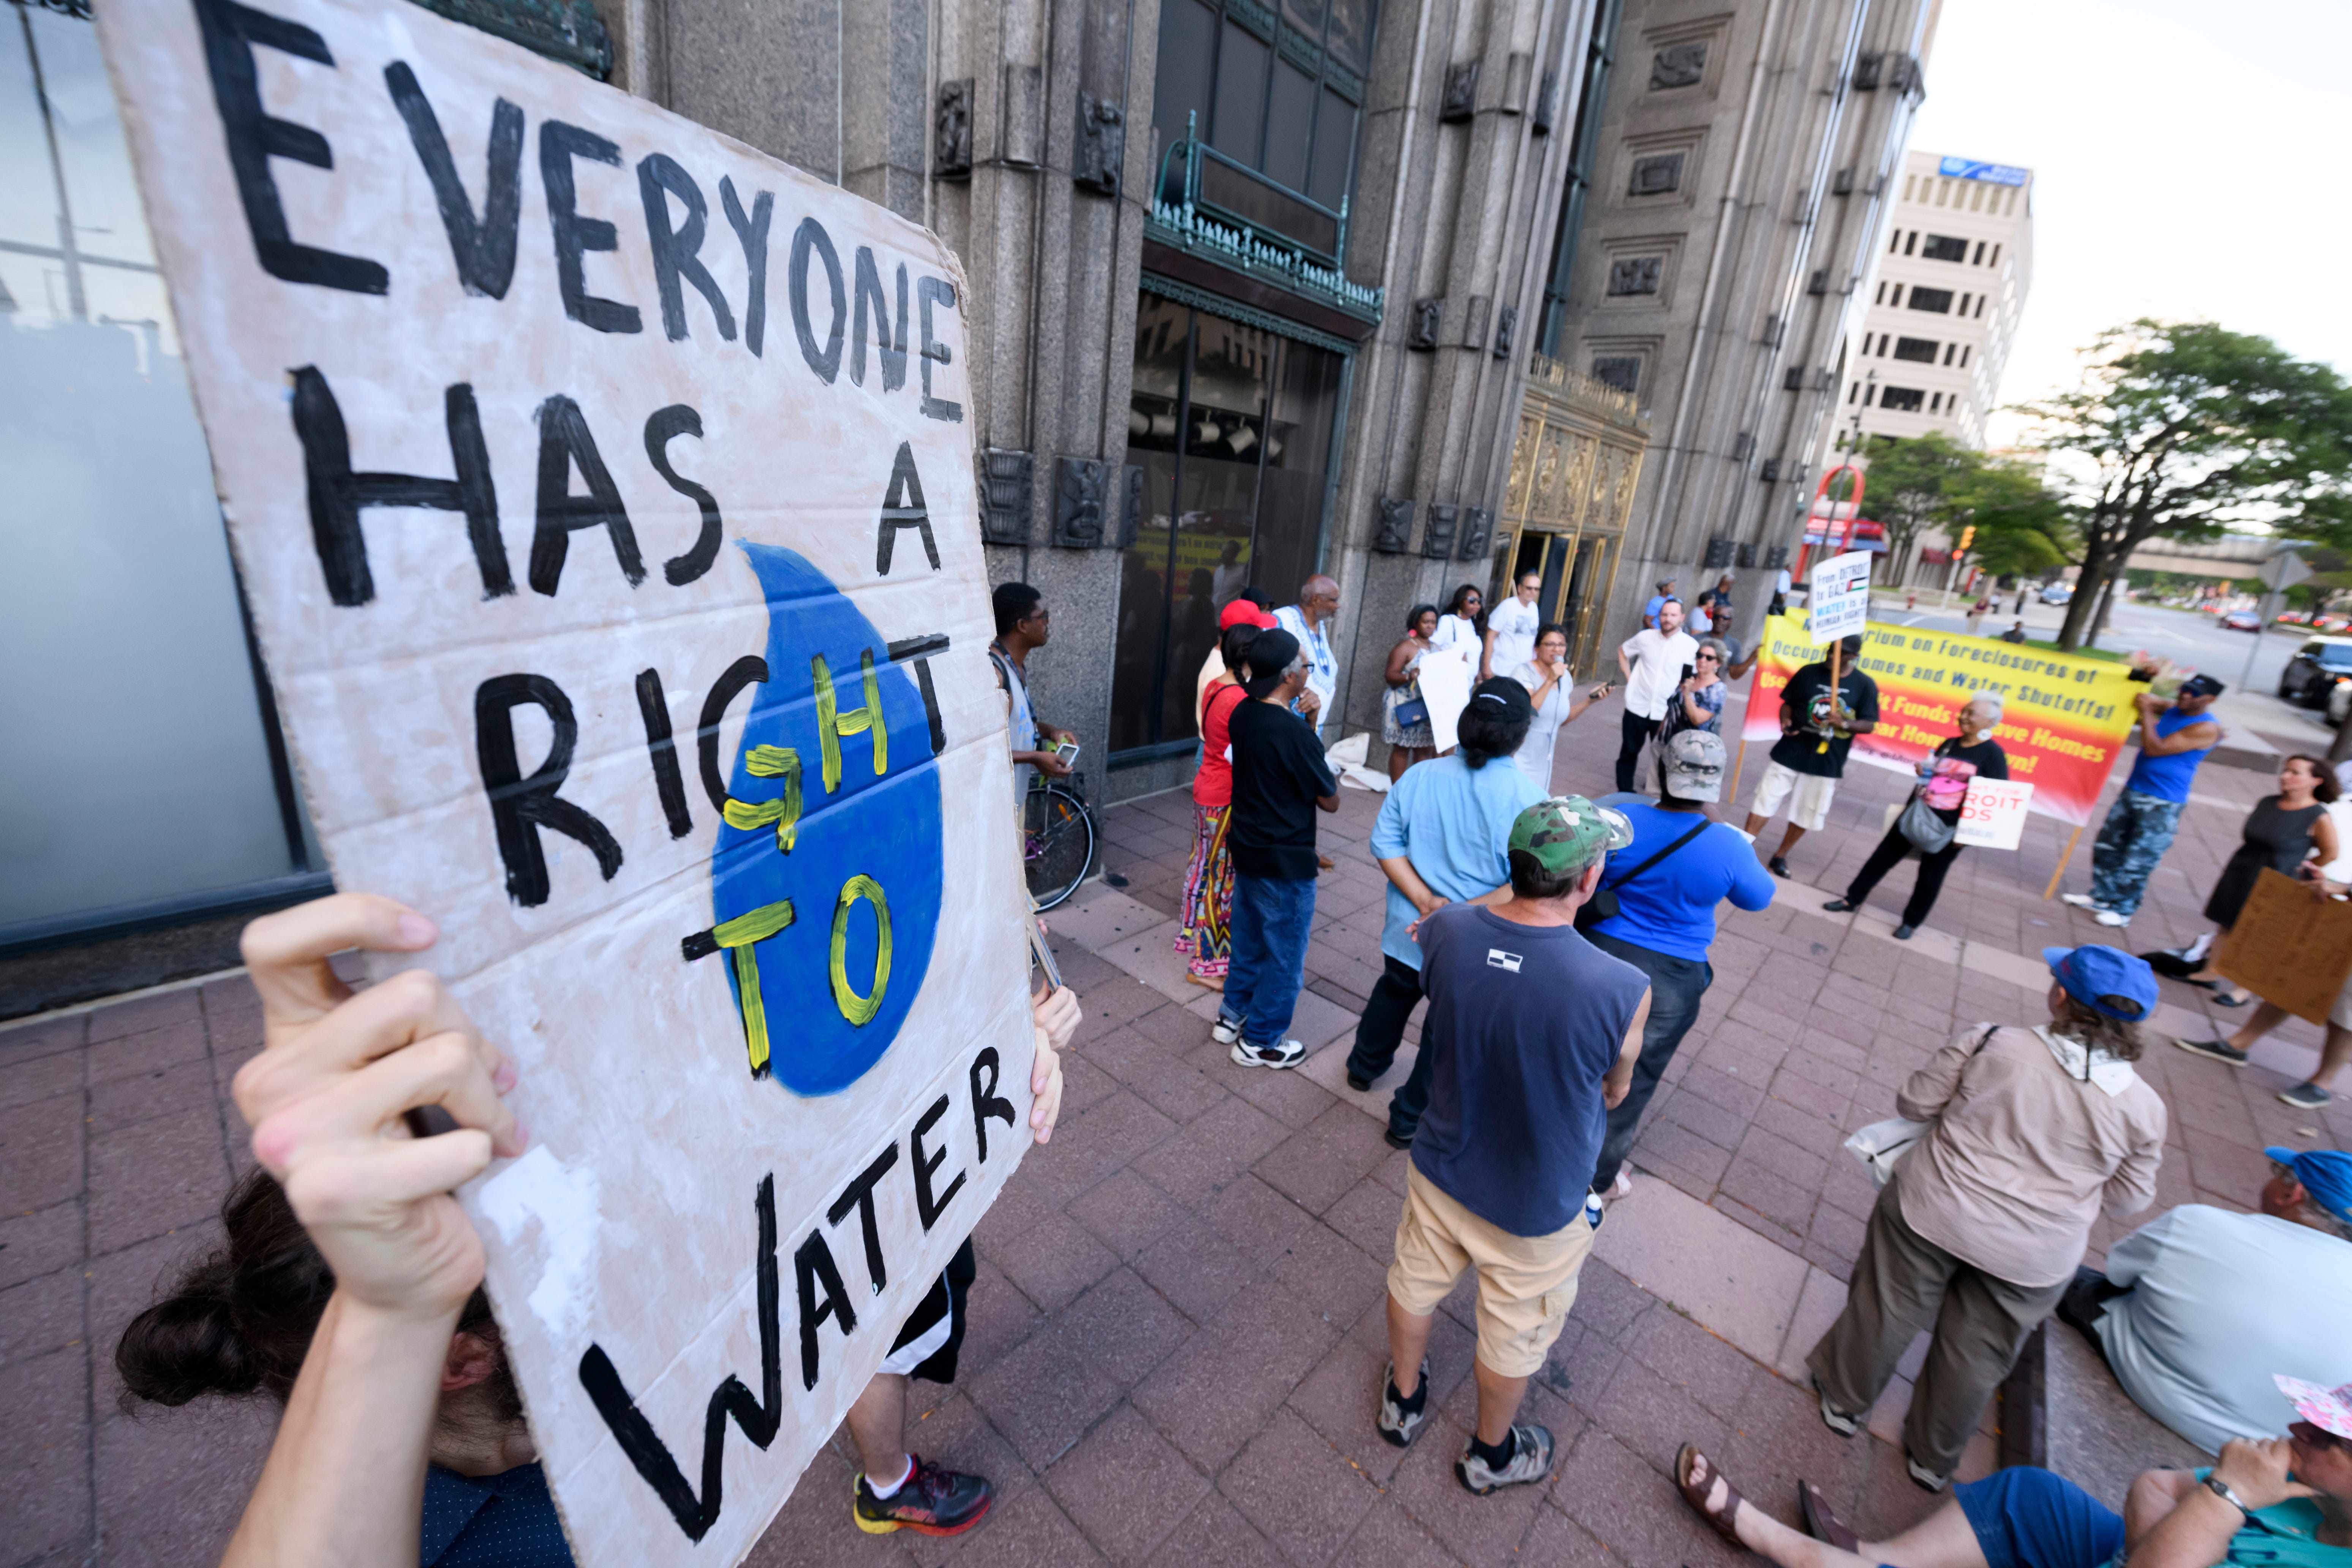 Signs are held during a demonstration and protest demanding safe and clean drinking water for students at Detroit Public Schools, held at the Fisher Building, home of the DPSCD administration office, in Detroit, September 4, 2018.